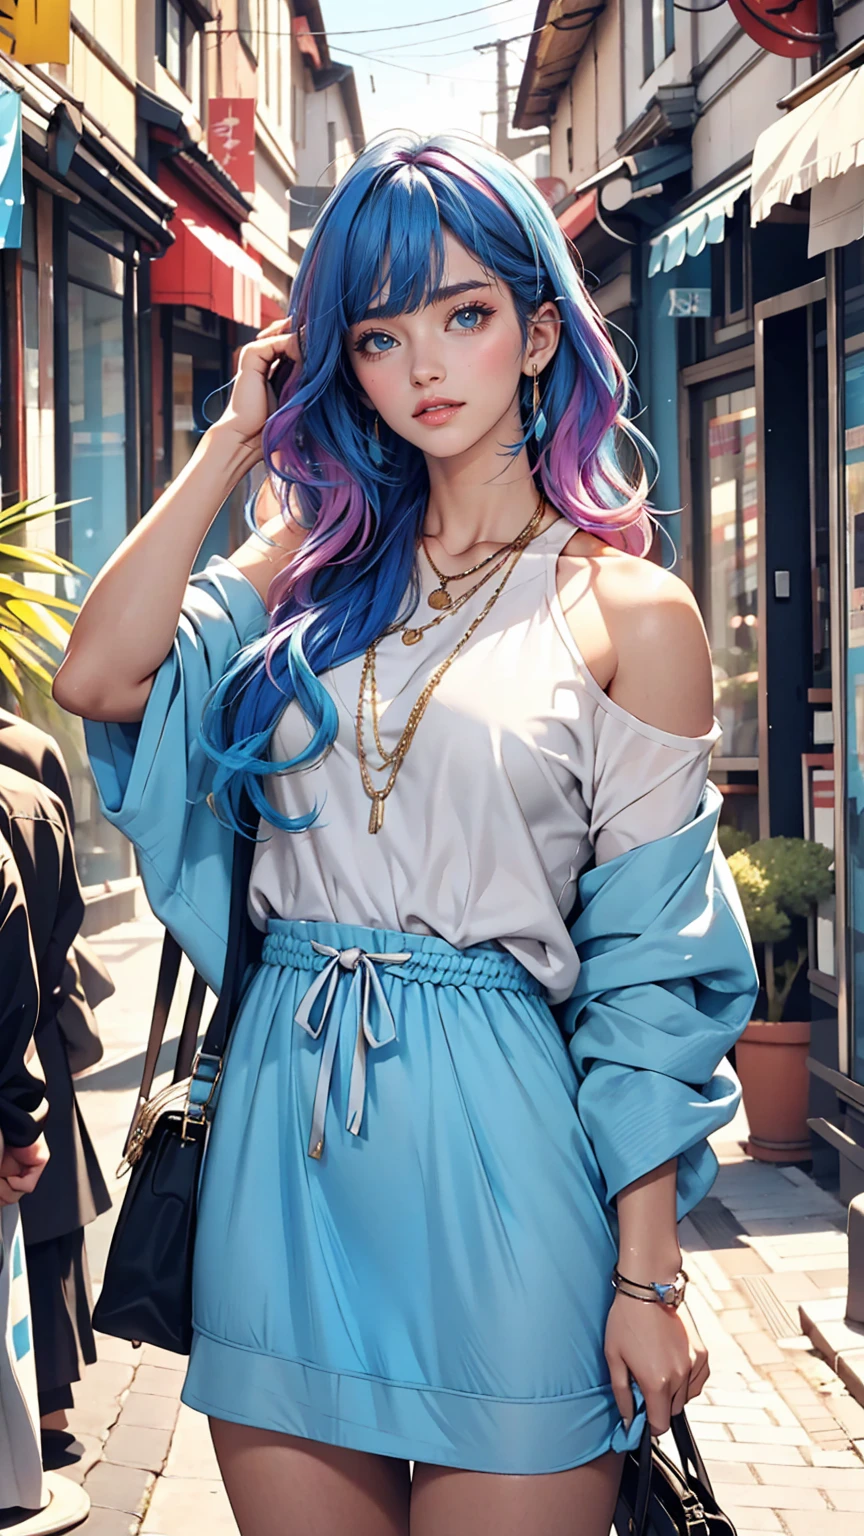 25-year-old woman、Hair color is gradient color、Eye color: Blue、semi-long、My hair is wavy、I&#39;m wearing eyeshadow and lipstick、I&#39;m wearing a headband、Accessories on the wrist、Slender but well-proportioned, slim and muscular body、Wearing a tie-front shirt、She&#39;s wearing a low-rise mini pleated skirt、smile、looking at the camera、surrounded by high concrete walls